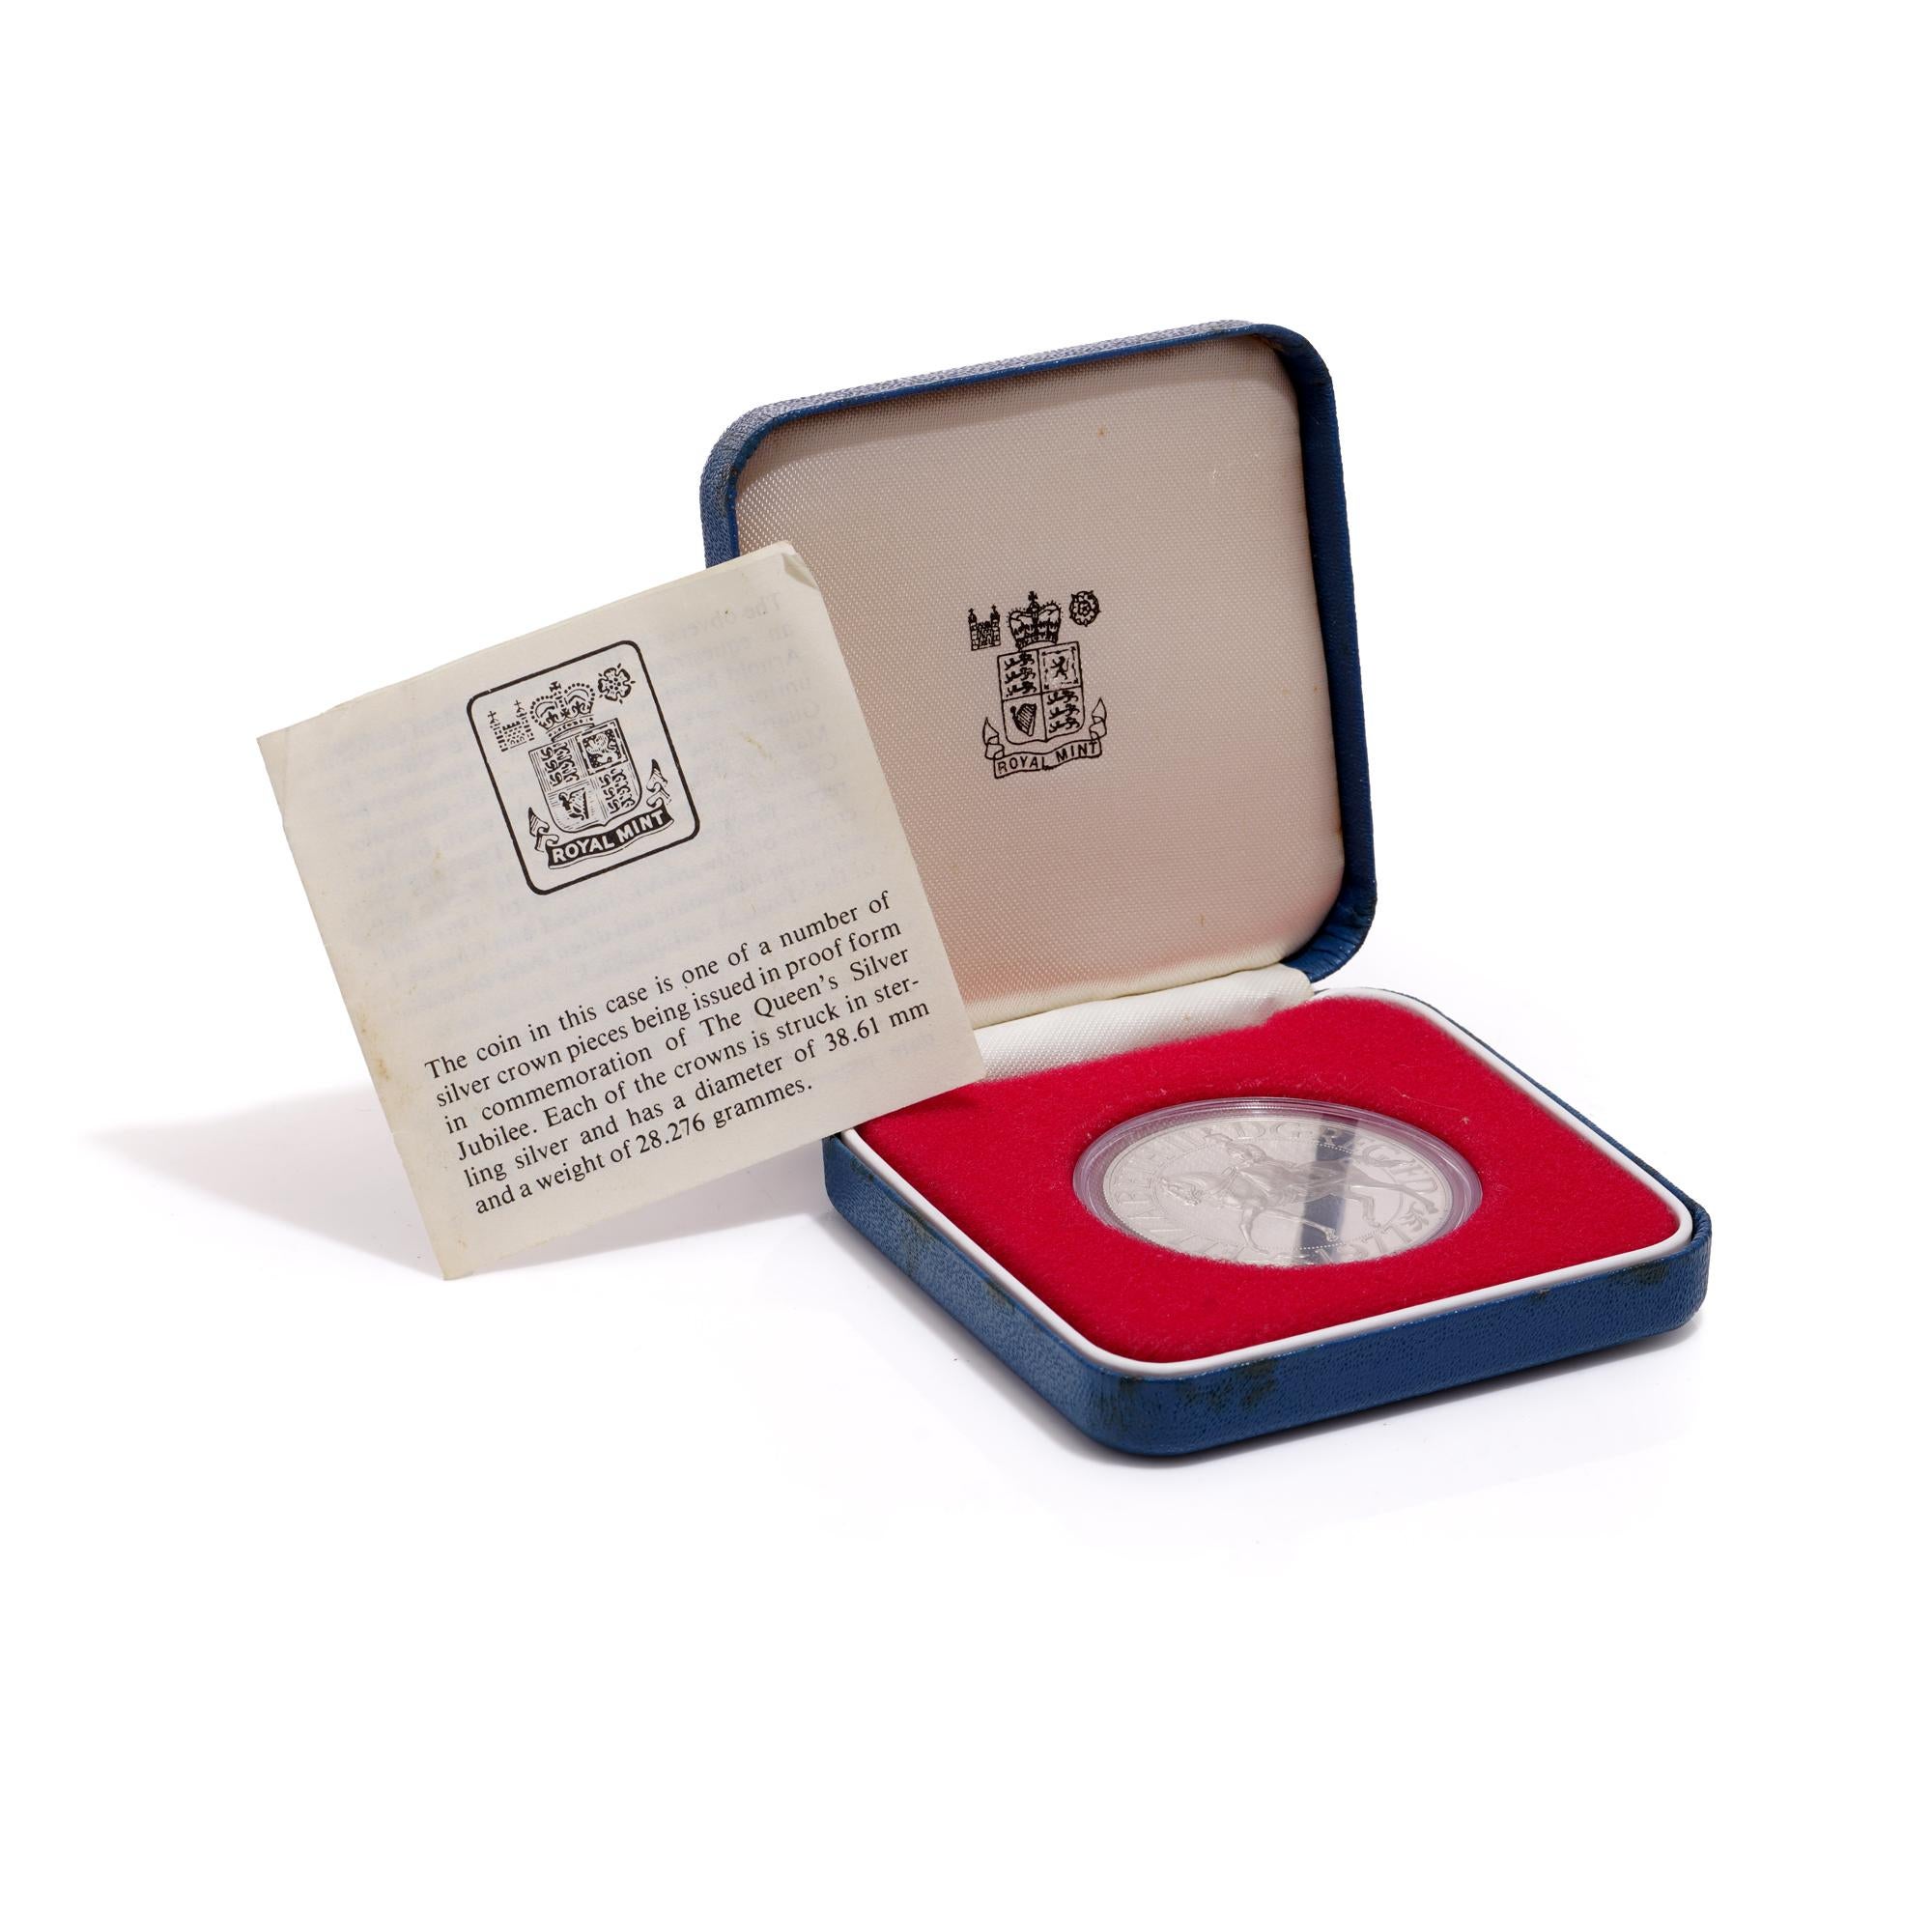 The coin in this case is one of a number of silver crown pieces being issued in proof form in commemoration of The Queen's Silver Jubilee.
Each of the crowns is struck in sterling silver and has a diameter of 38.61 mm and a weight of 28.276 grammes.